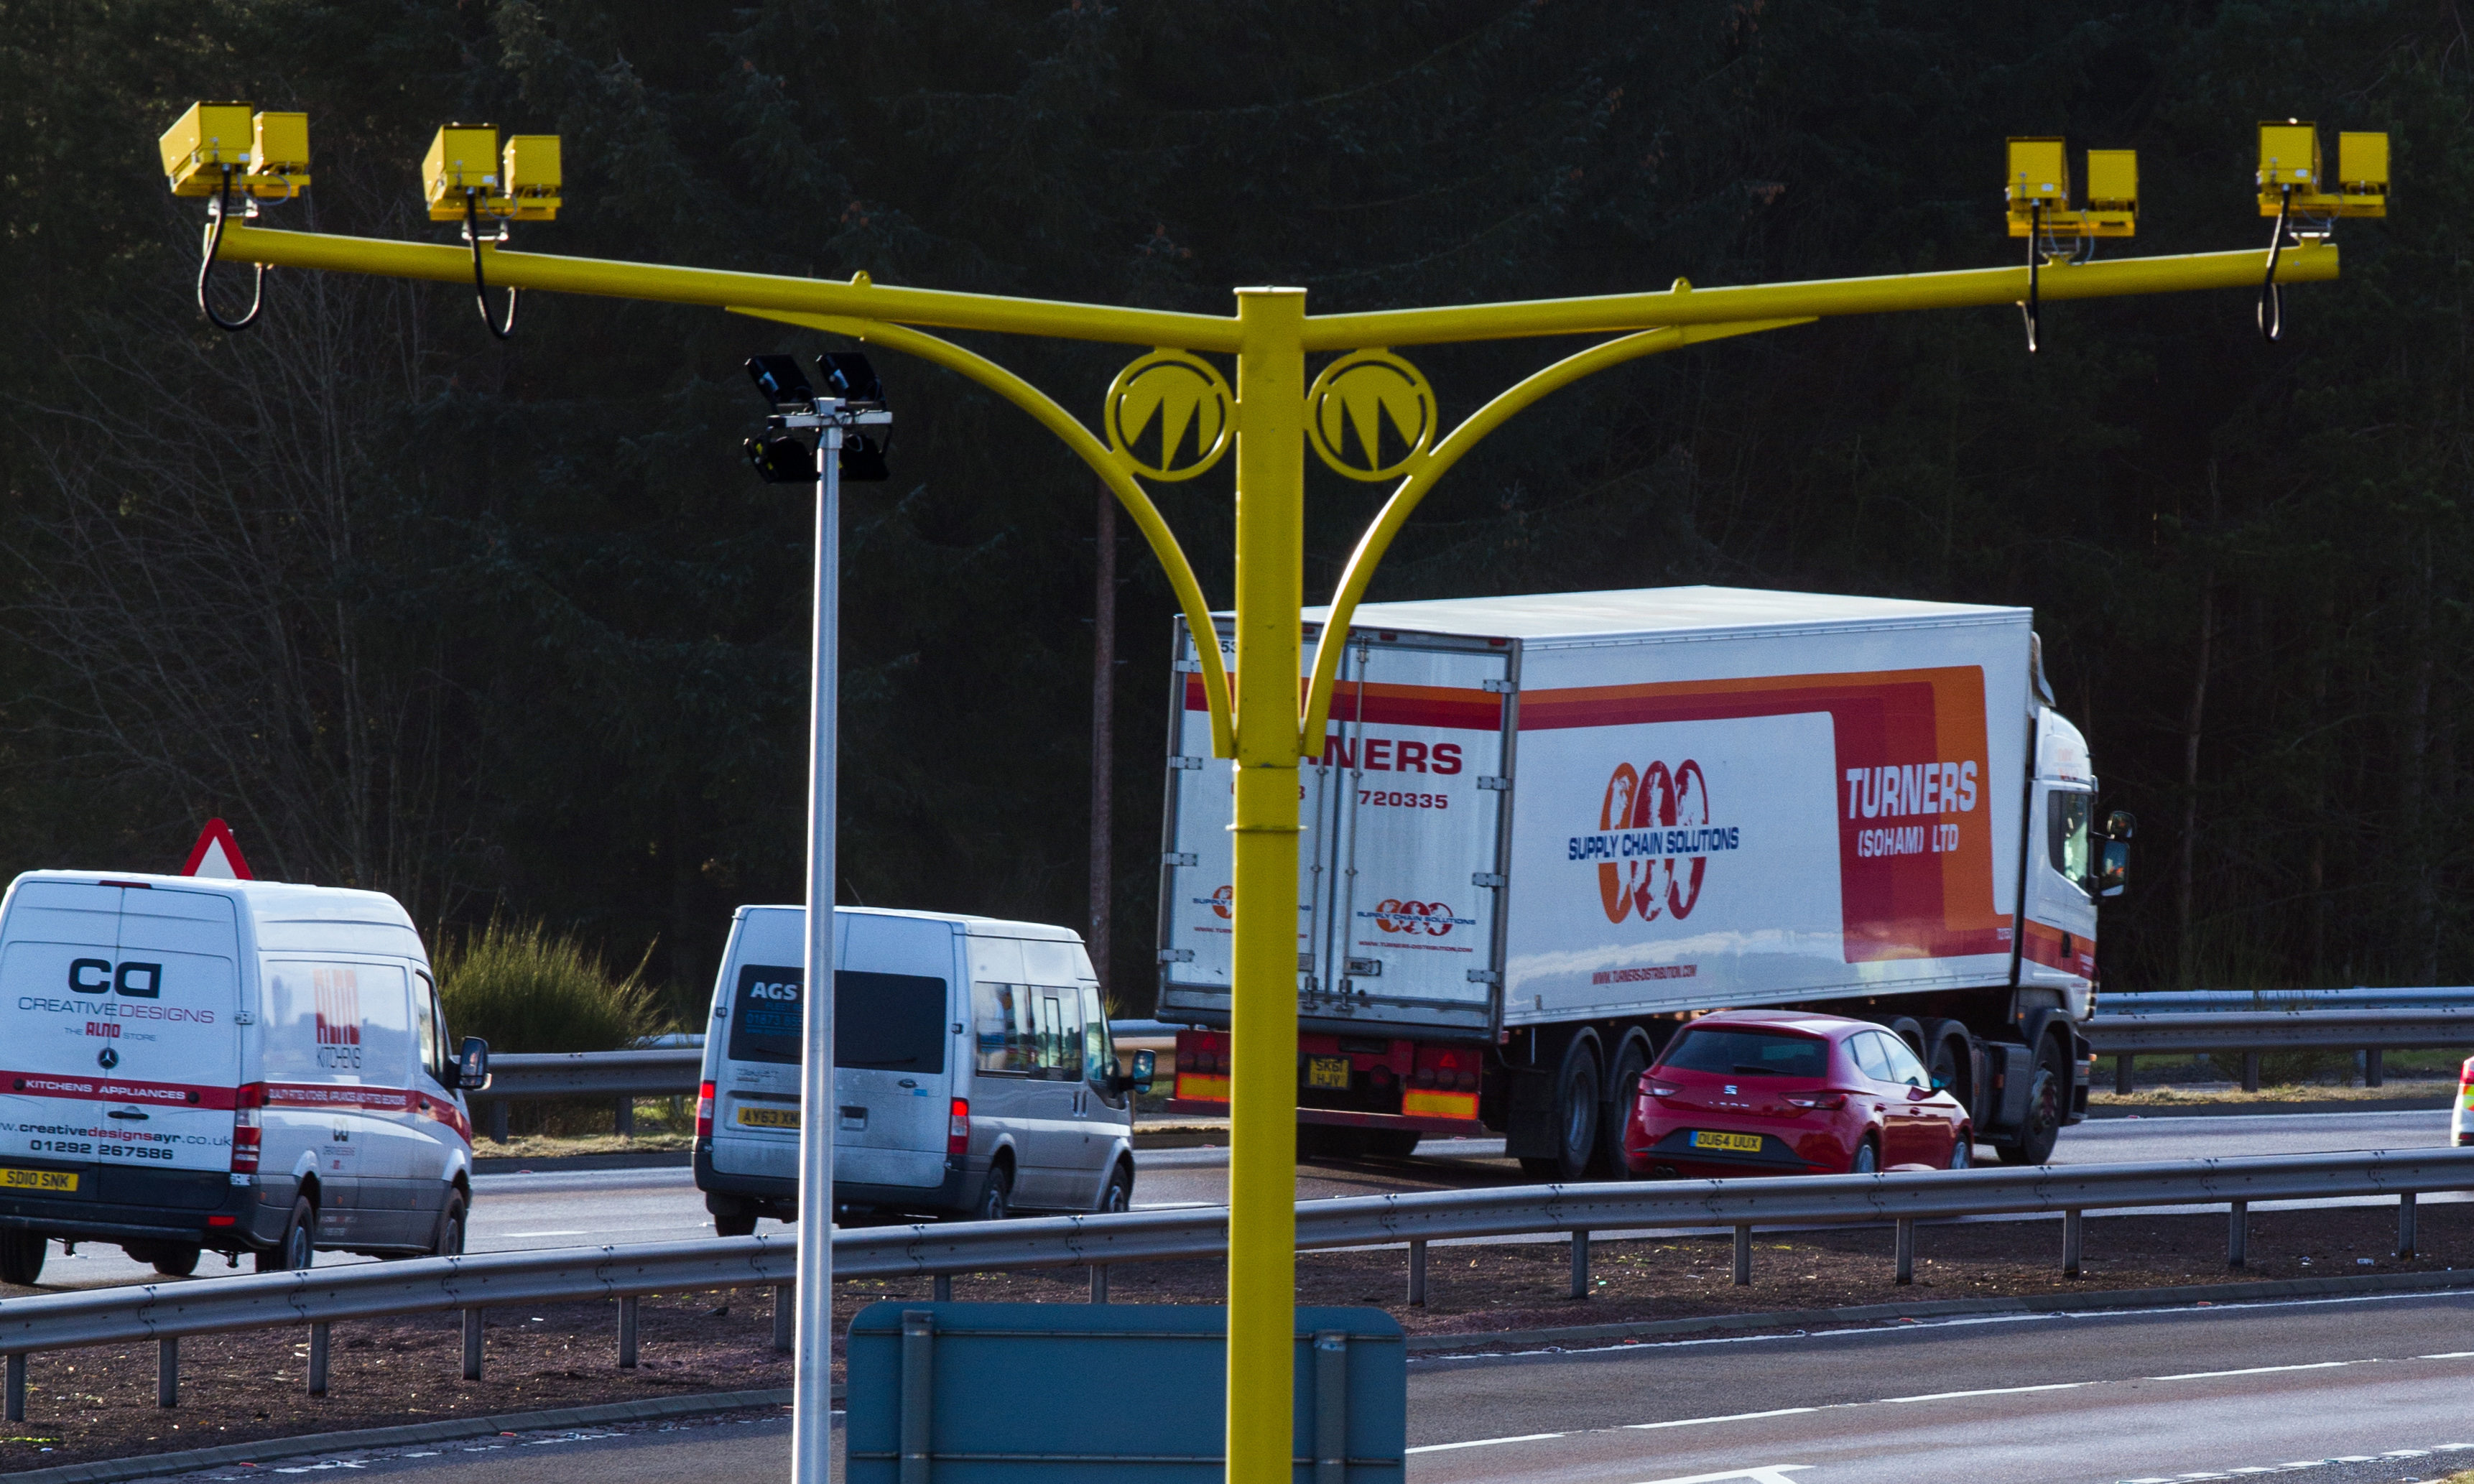 Average speed cameras are not enough to make residents in southern A9 settlements feel safe.